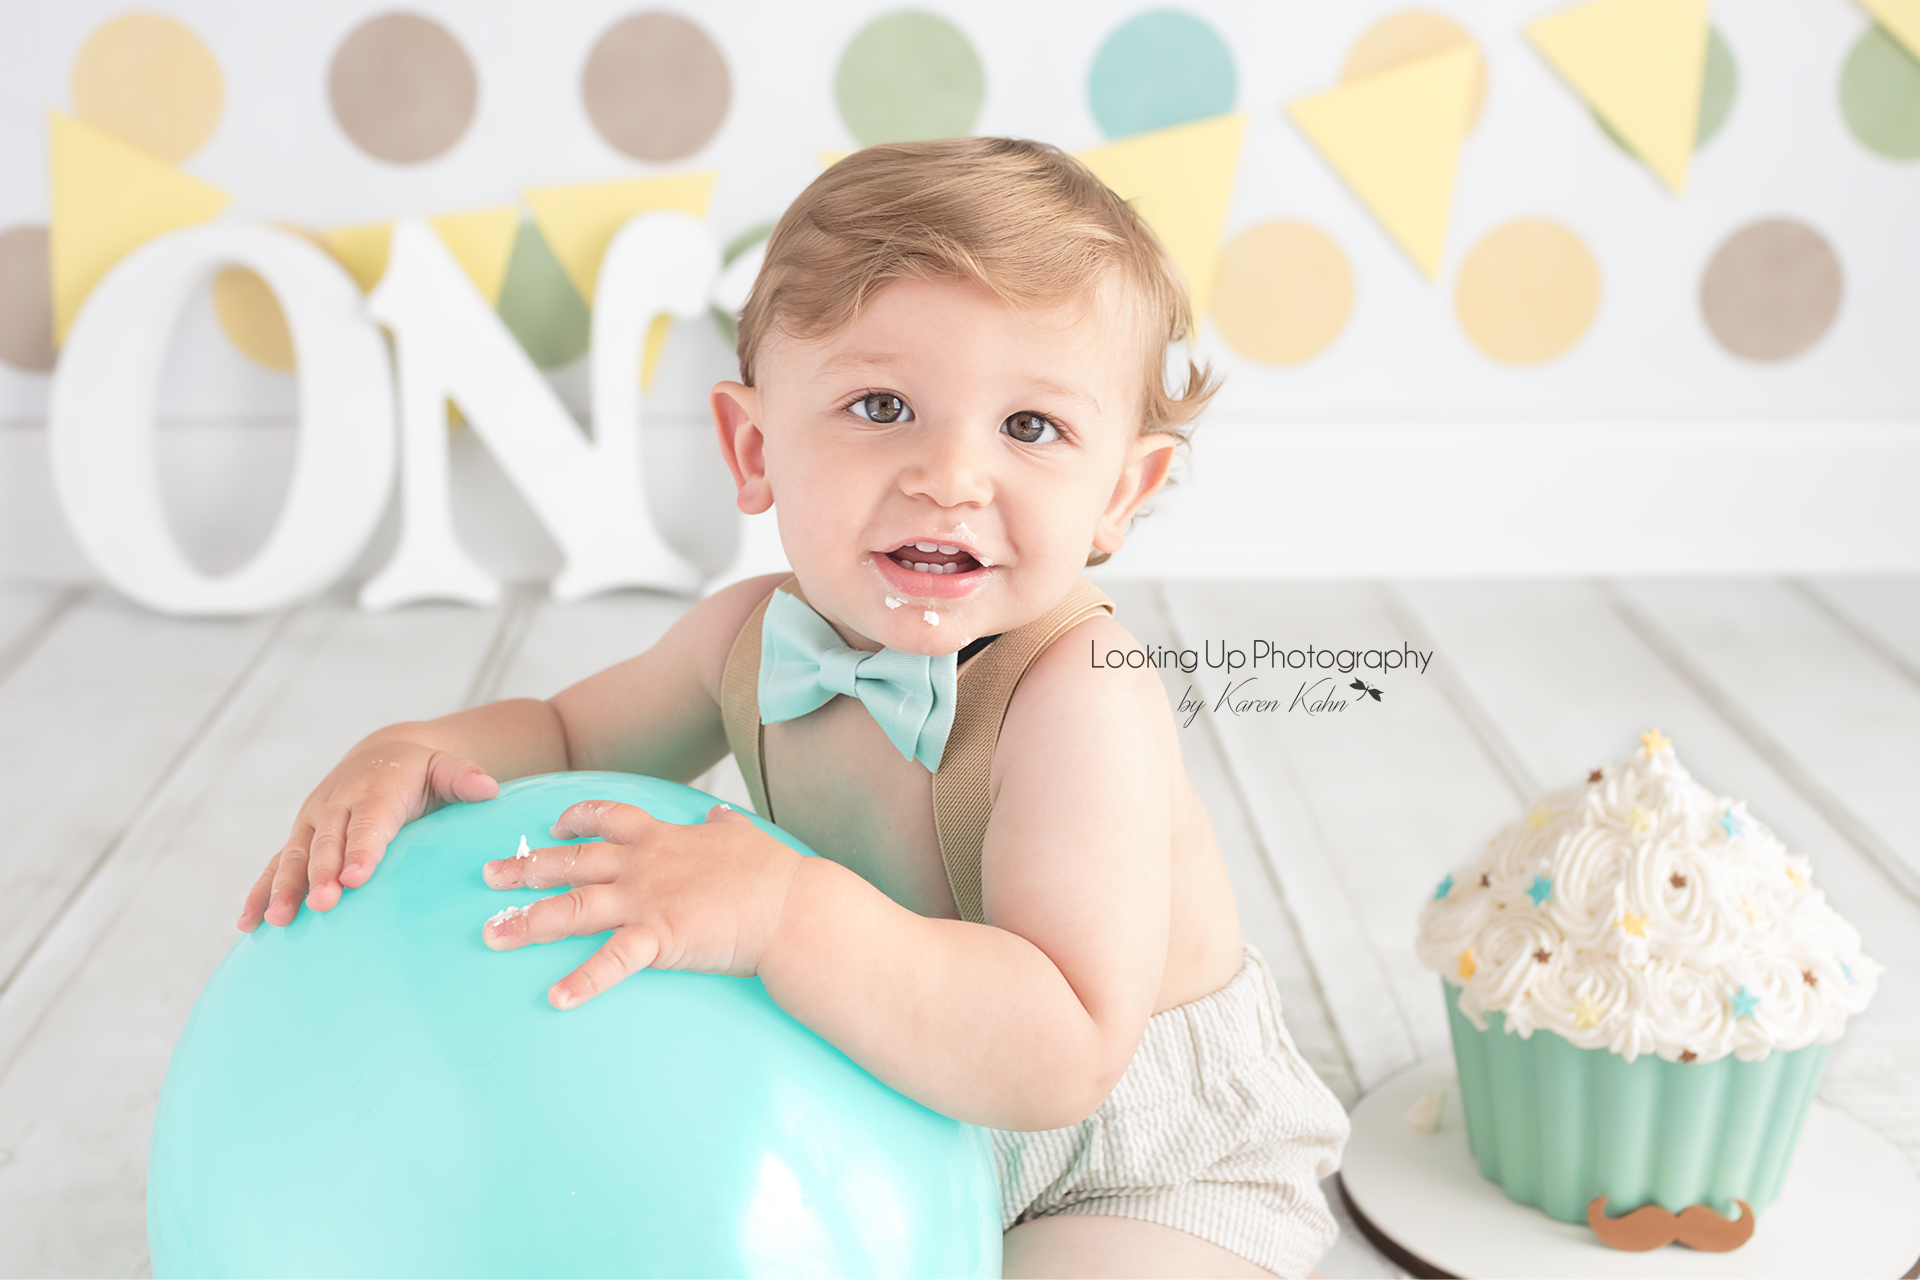 12 month celebration for baby boy looking snazzy in bow tie and suspenders with polka dots and mustache cake for One year old milestone portrait cake smash session